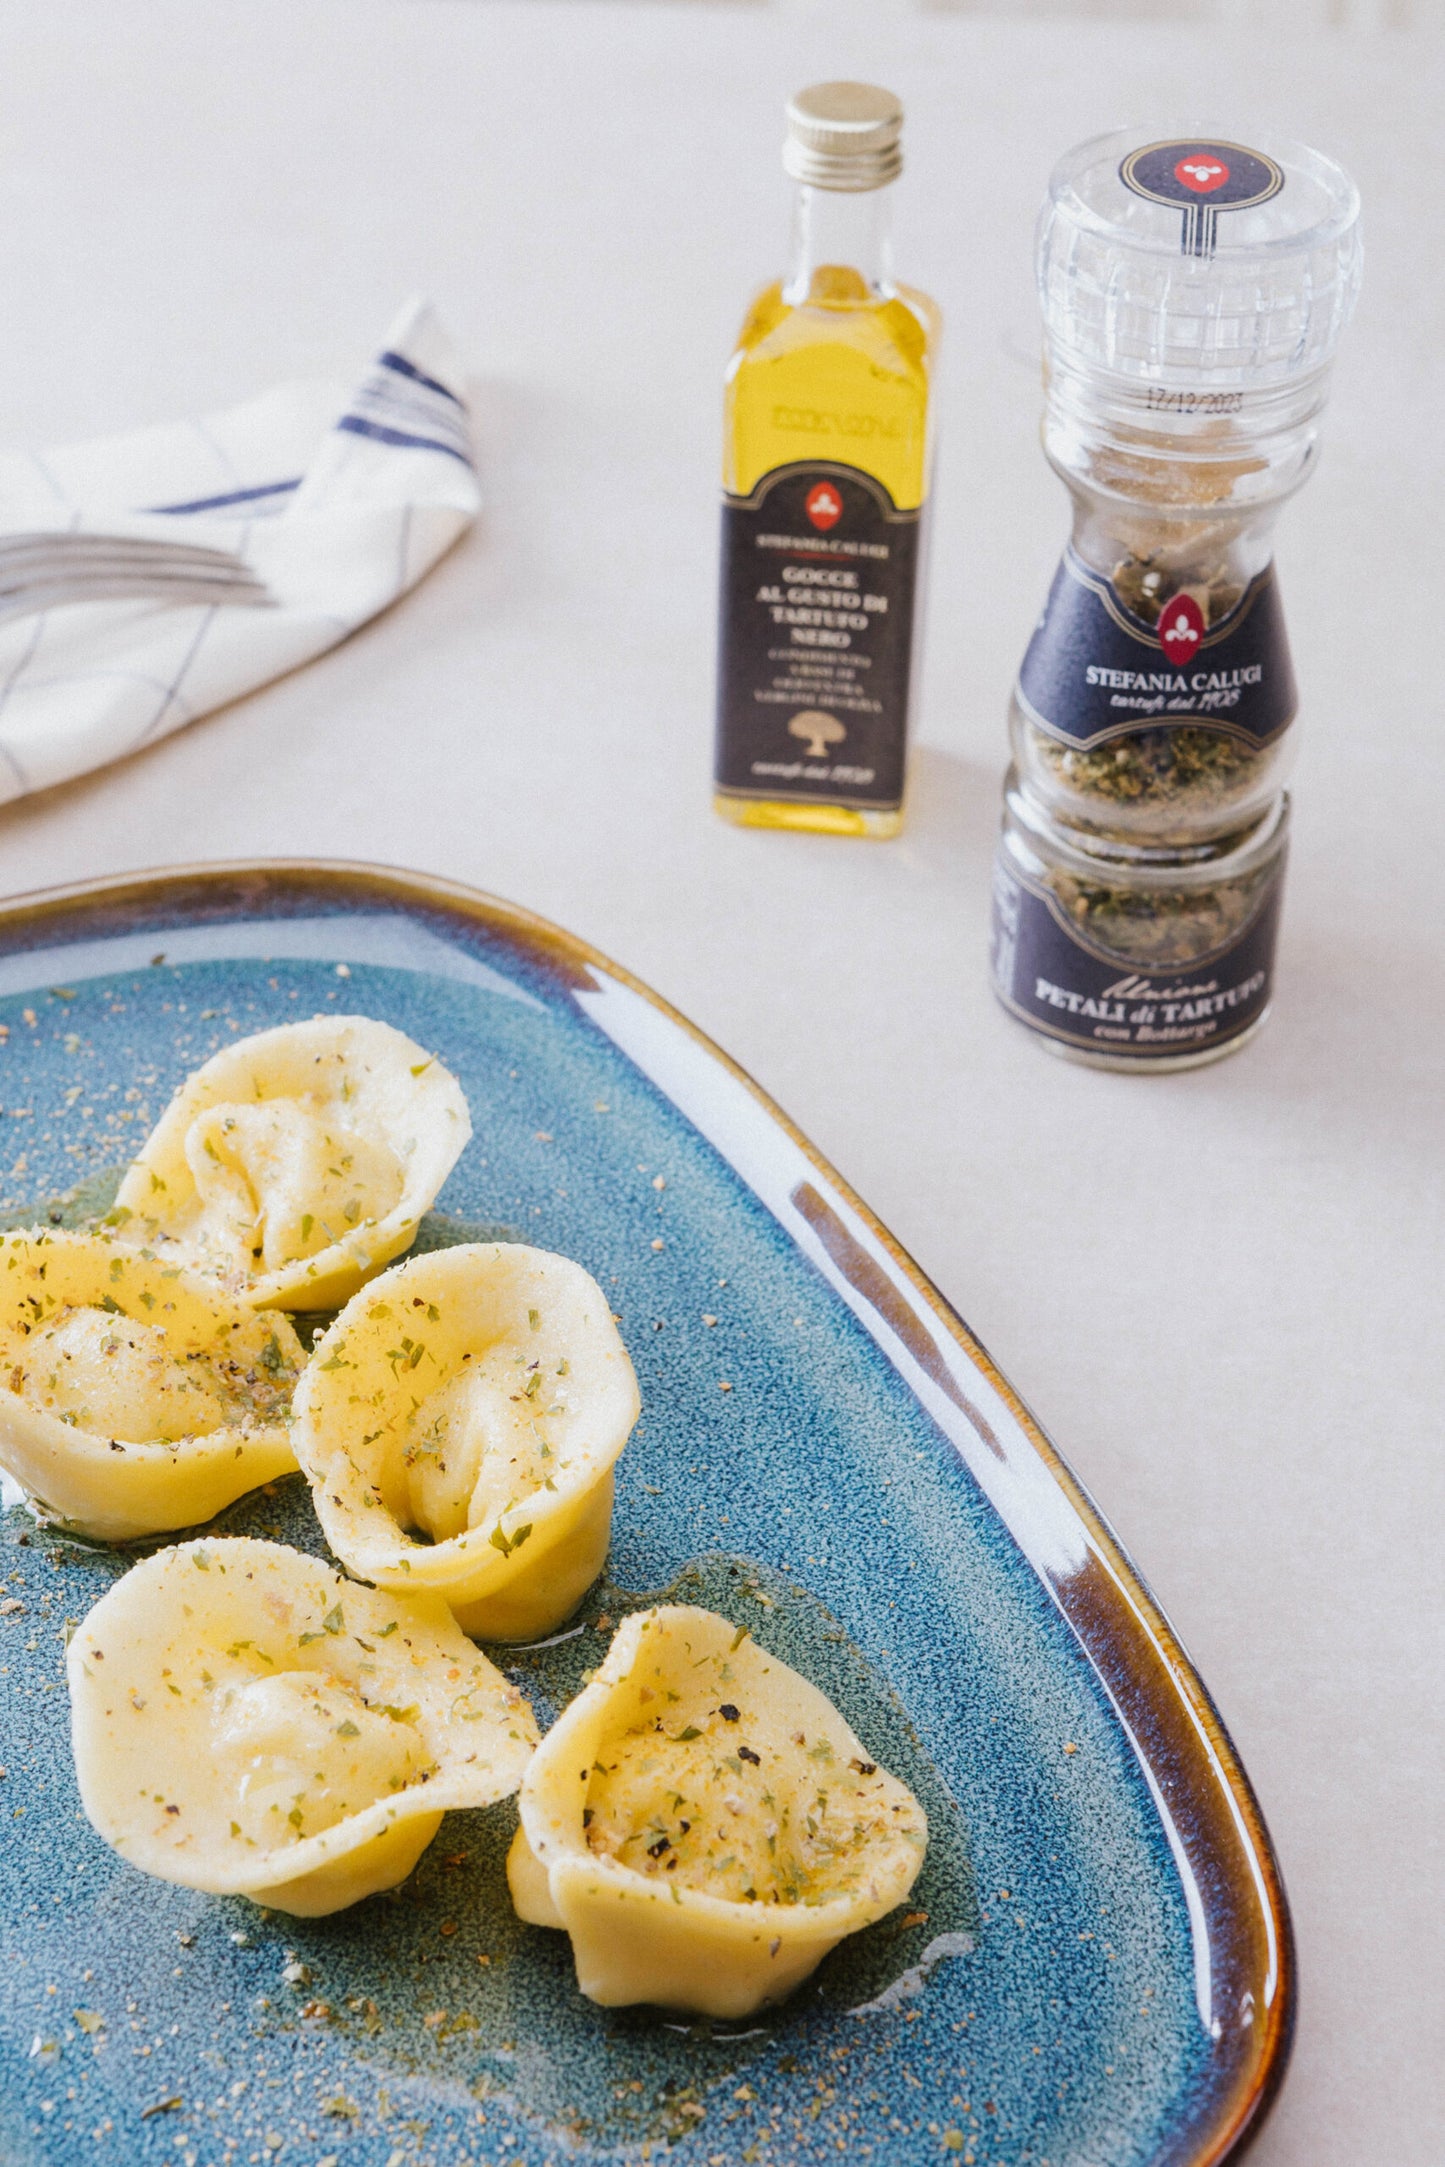 Extra Virgin Olive Oil With White Truffle 250ml